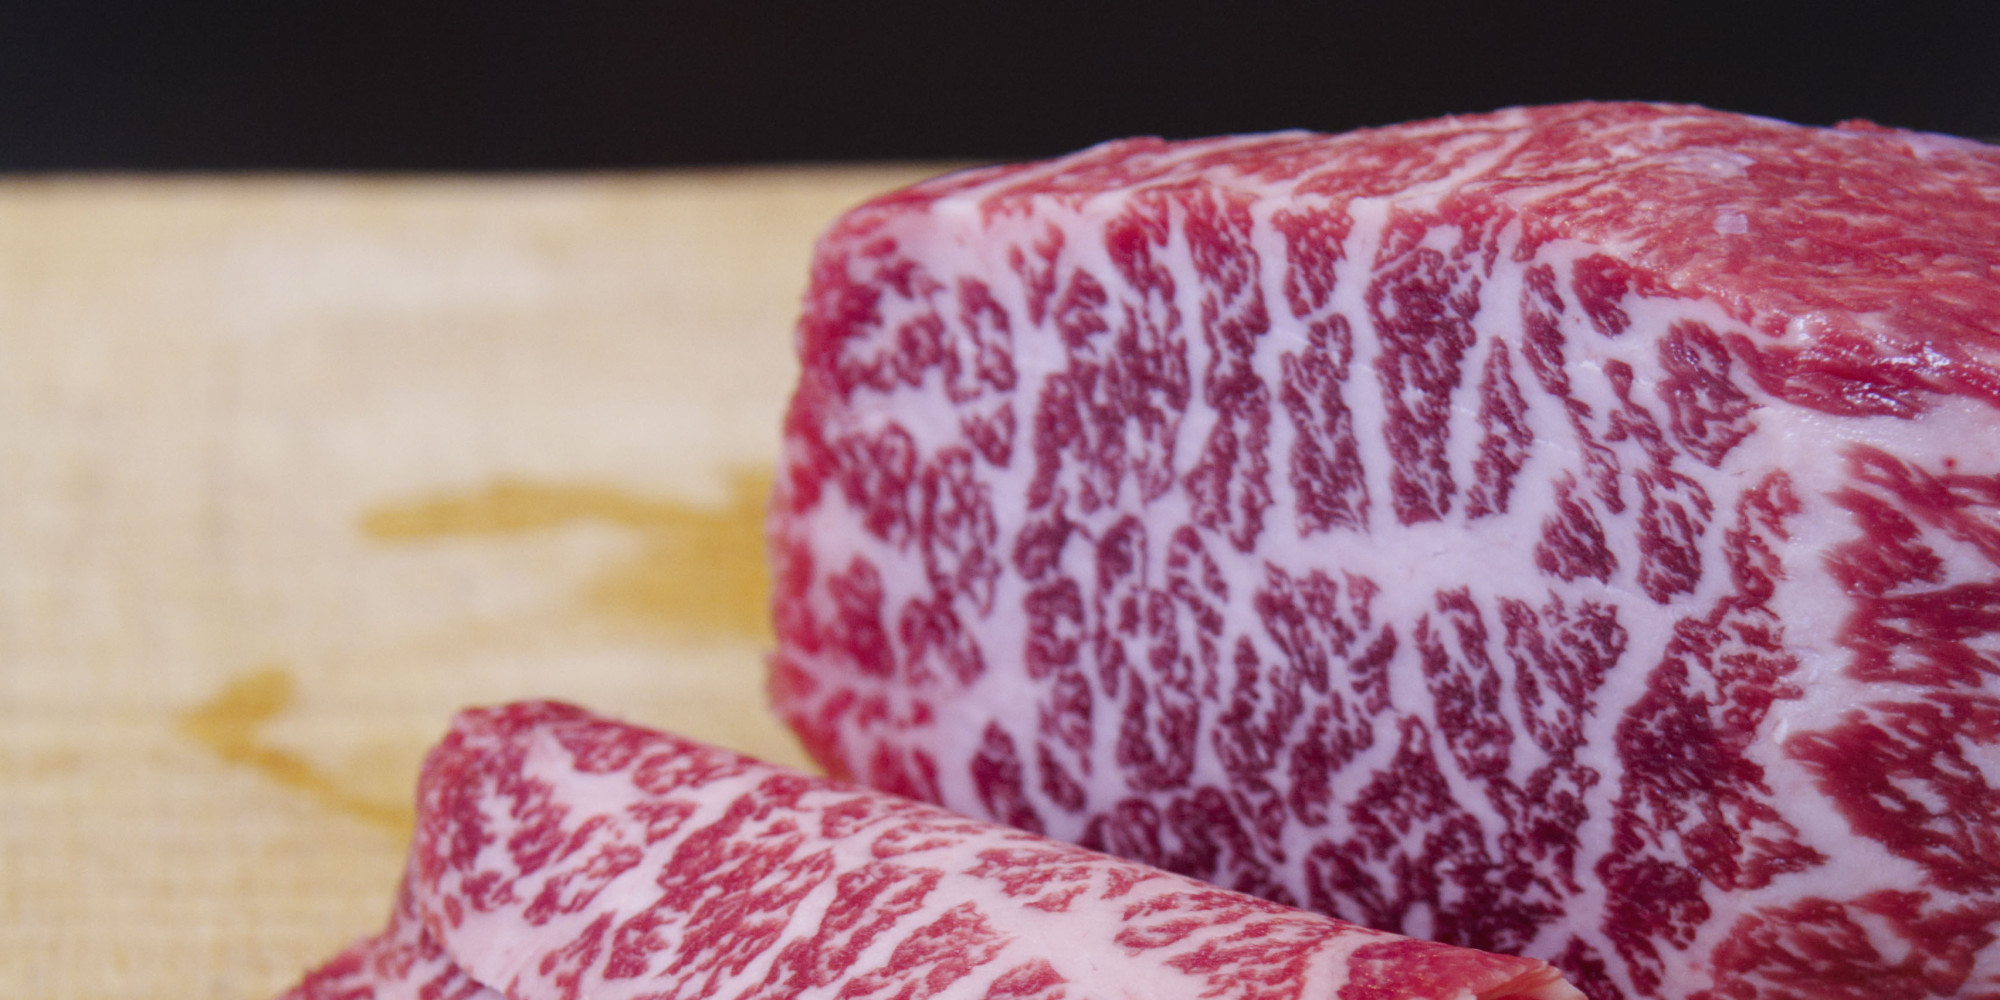 11 Times Raw Meat Was Insanely Beautiful (PHOTOS) | HuffPost